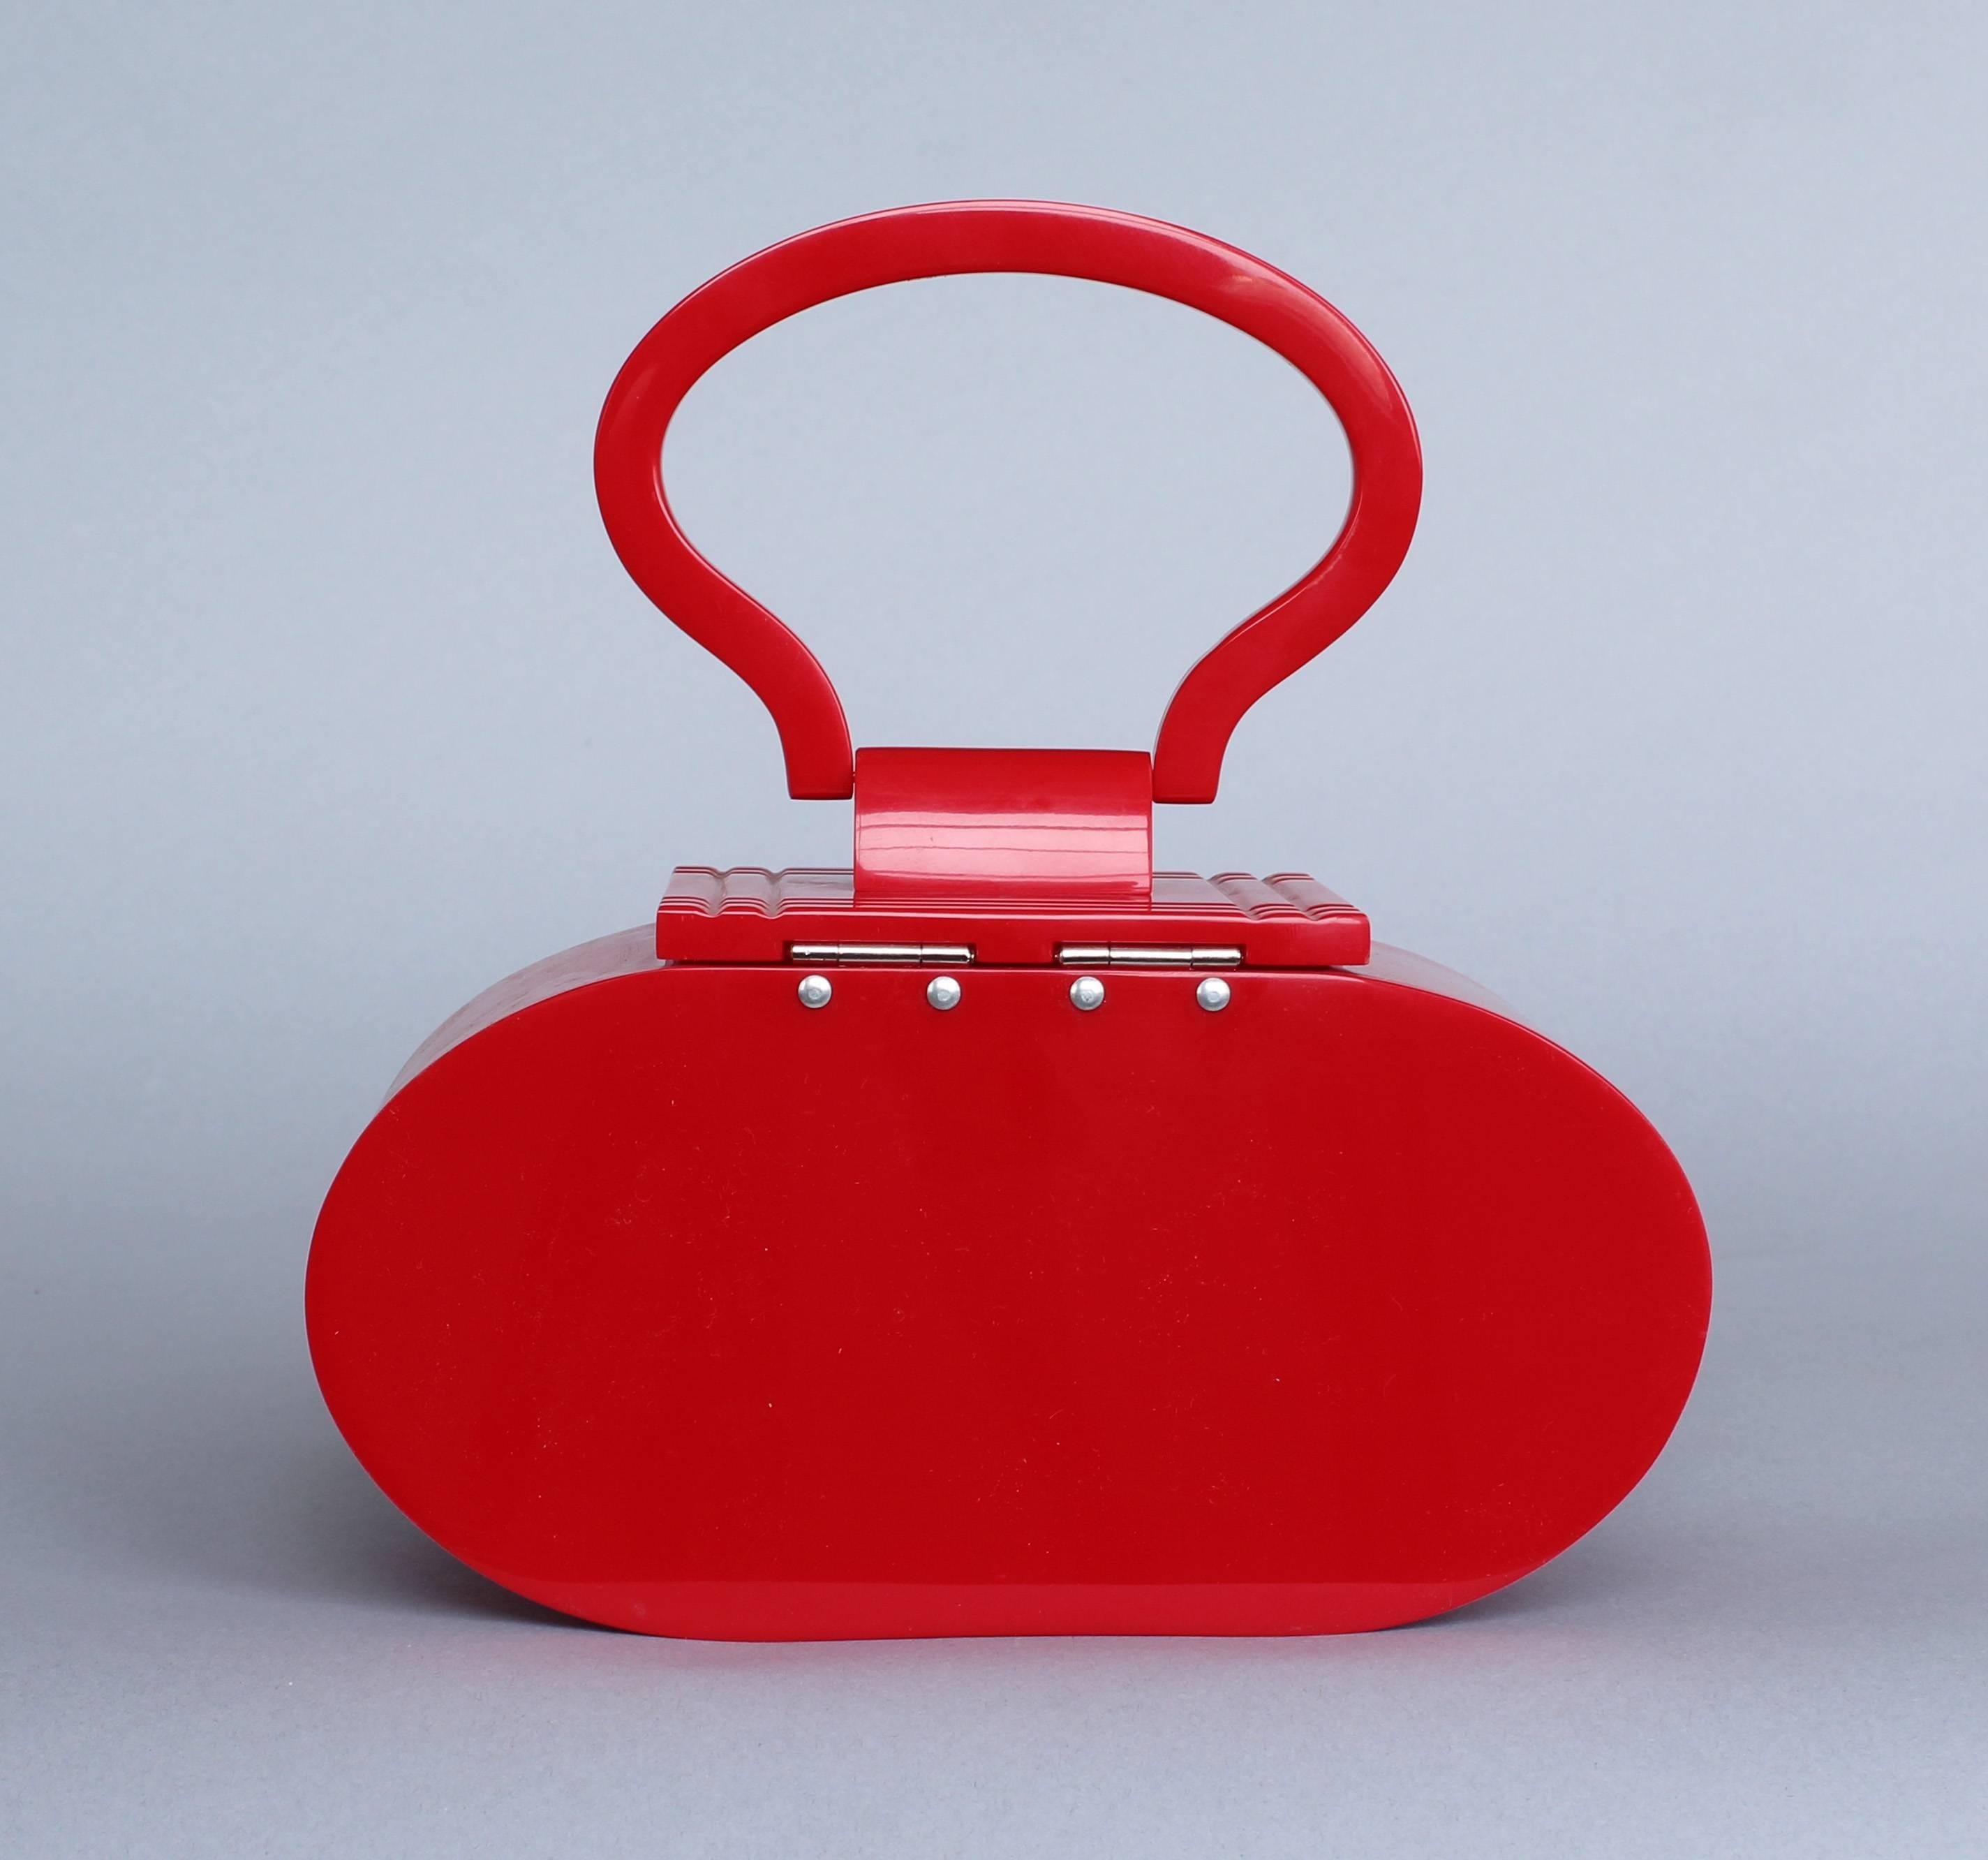 Mid-Century Modern French Red Lucite Handbag with Chrome Clasp, circa 1960